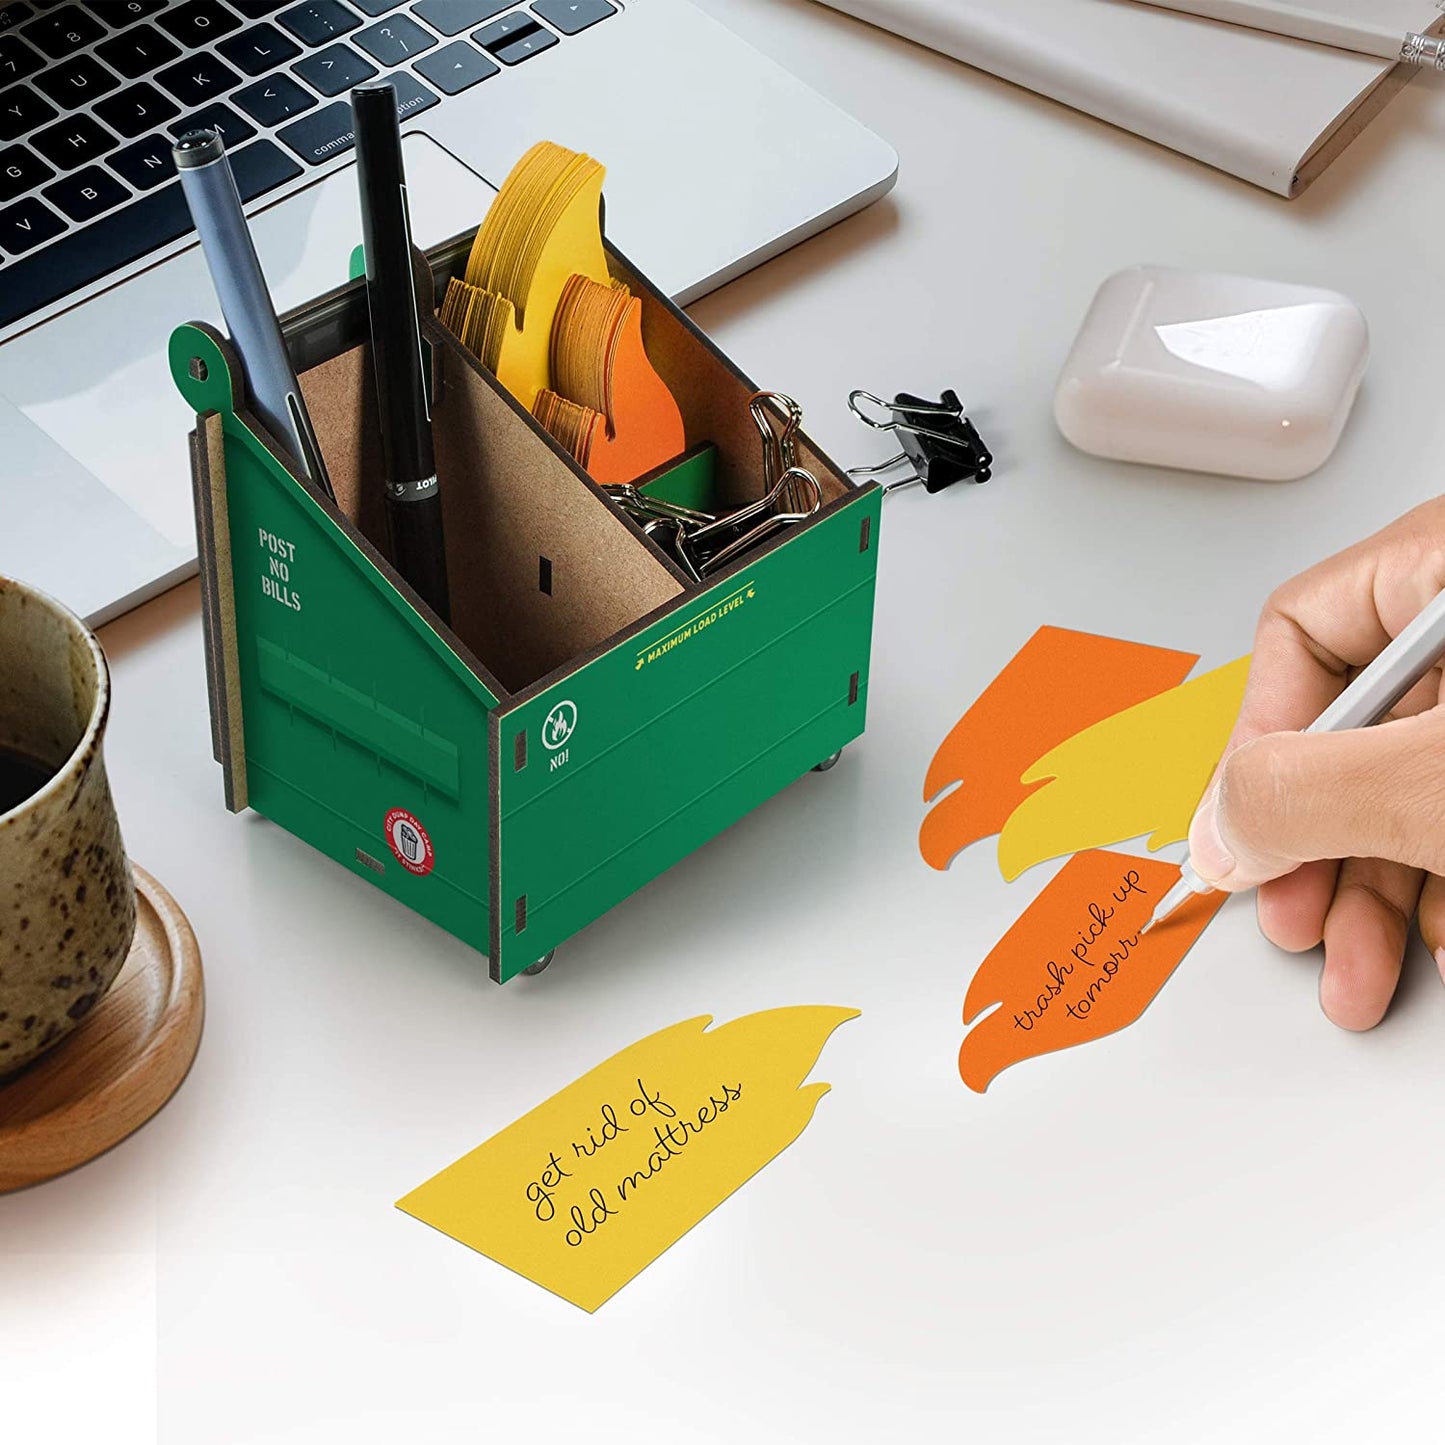 A pencil and note holder in the shape of a dumpster fire is on a desk. The note cards look like flames and a hand is writing on one of the notes.